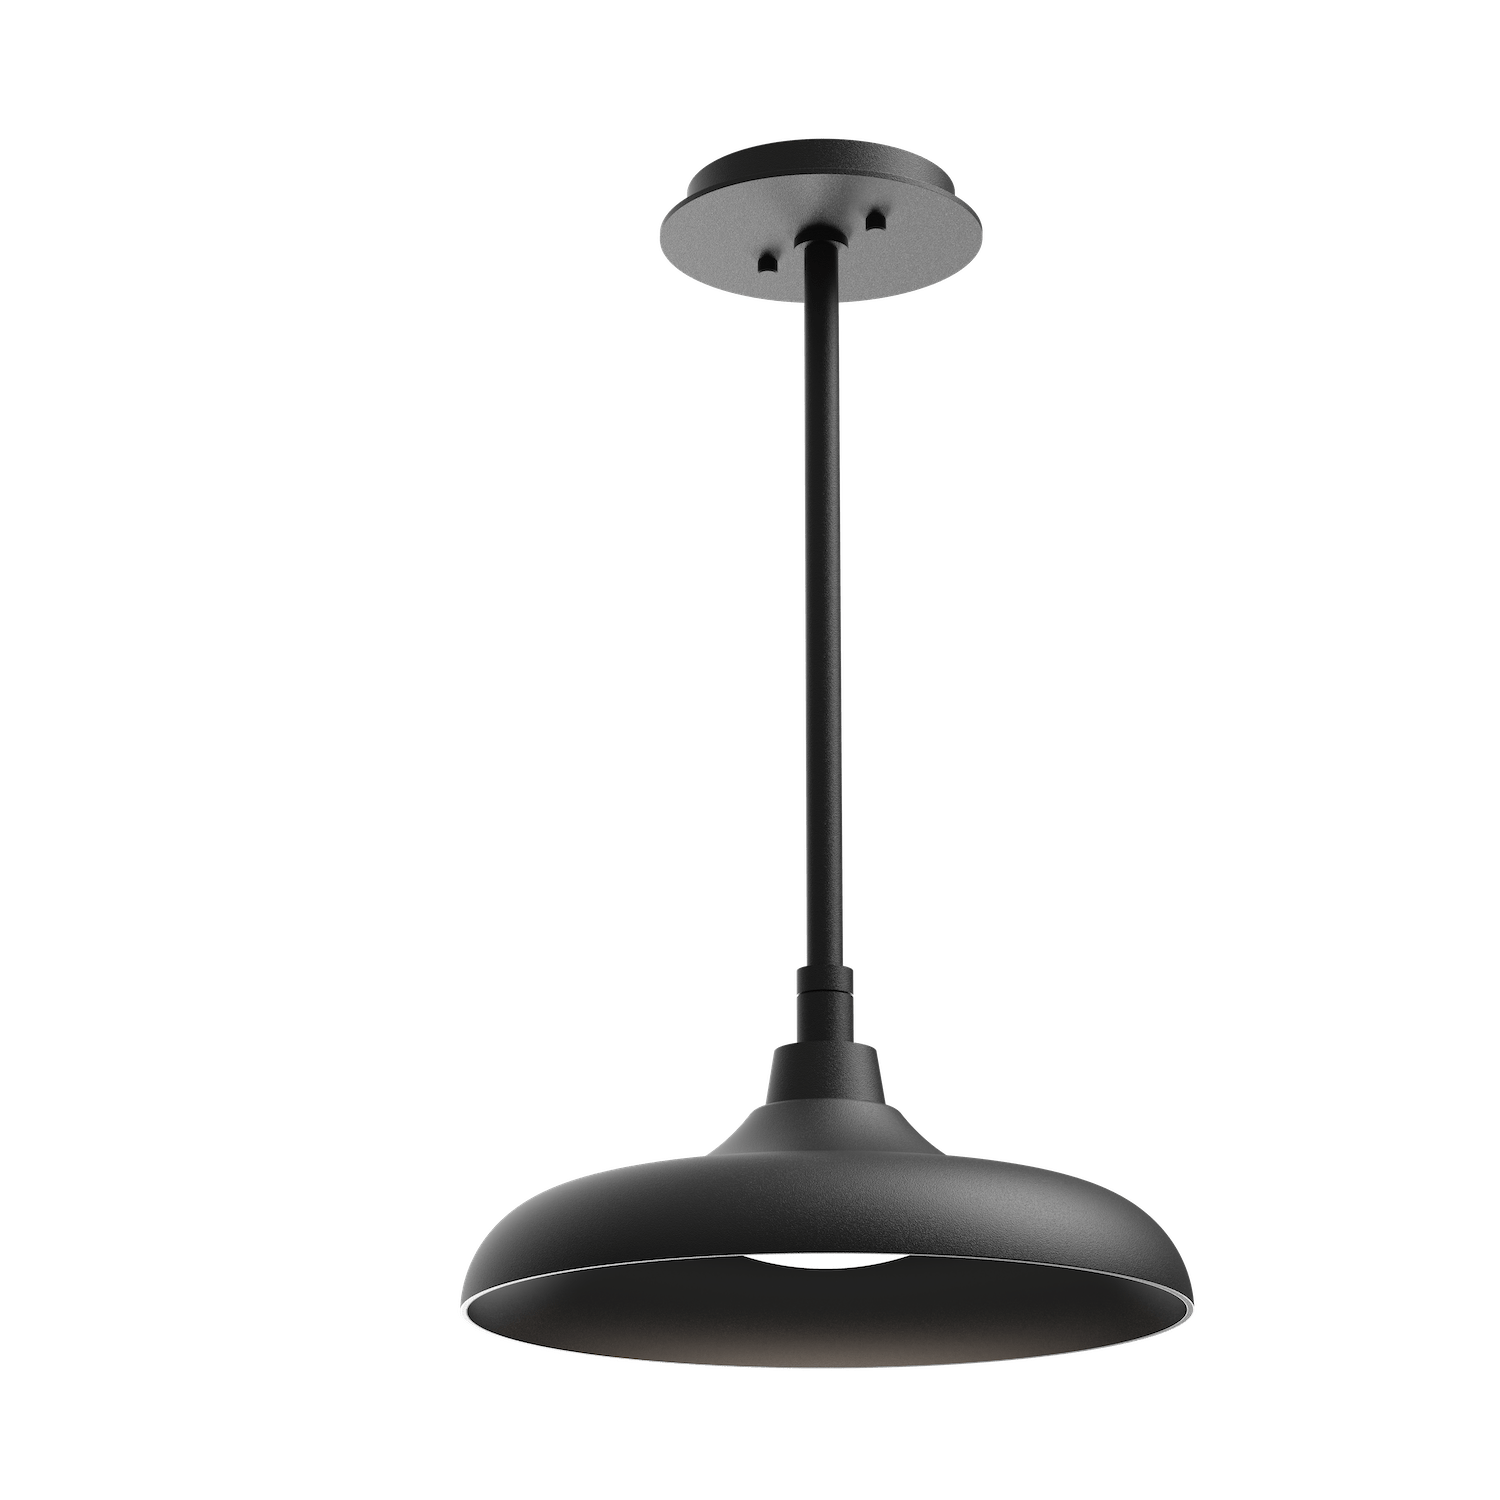 OPB0074-01-TB-O-Hammerton-Studio-Ranch-12-inch-outdoor-pendant-light-with-textured-black-finish-and-frosted-glass-shade-and-LED-lamping